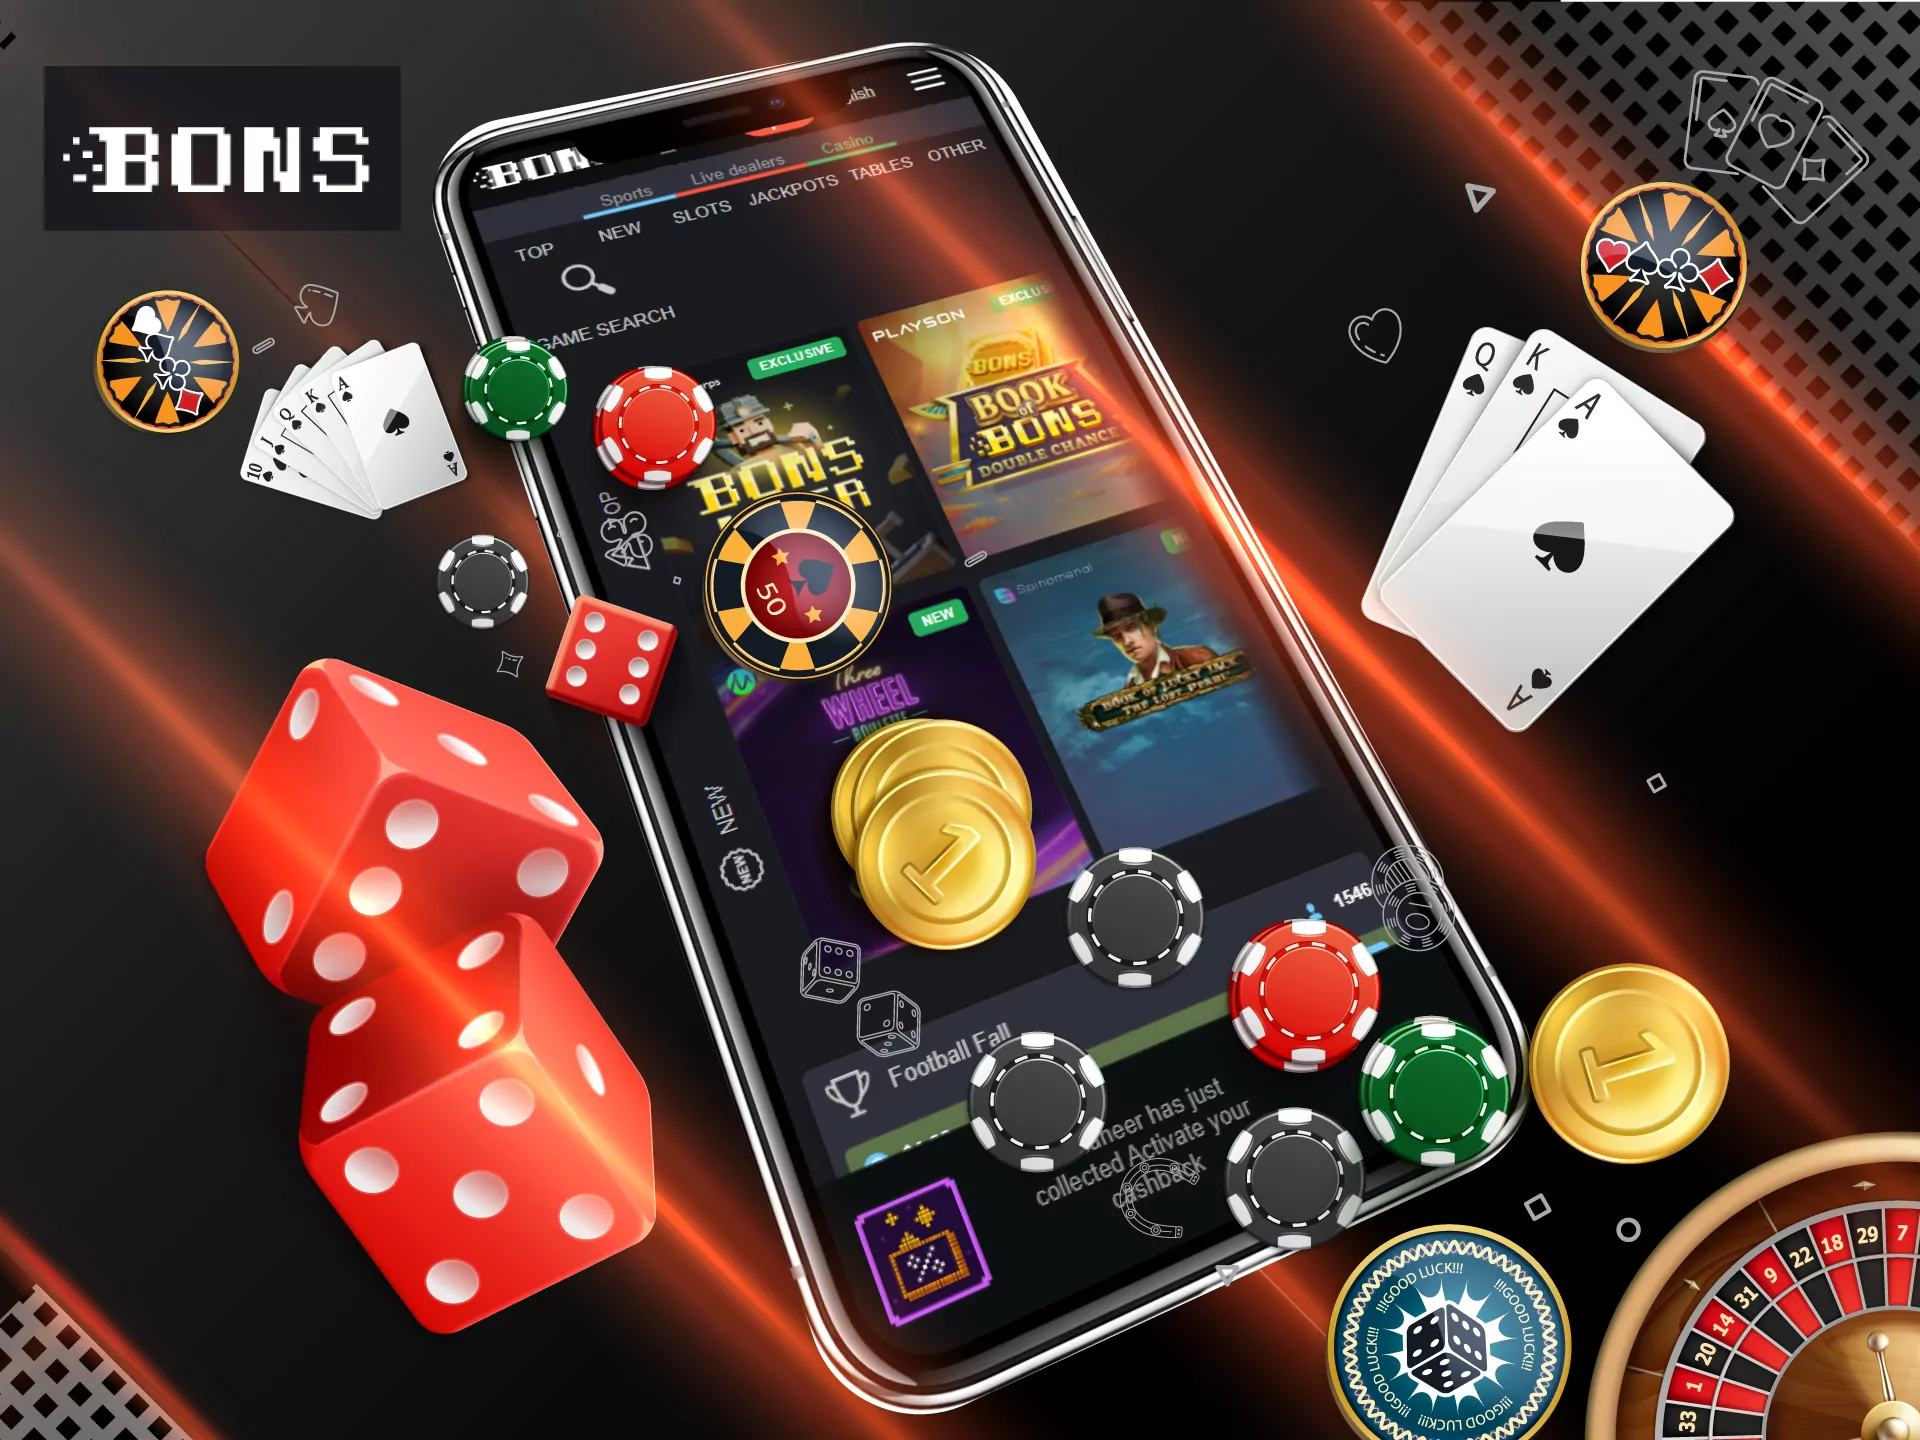 Bons also has a great online casino for your enartainment.